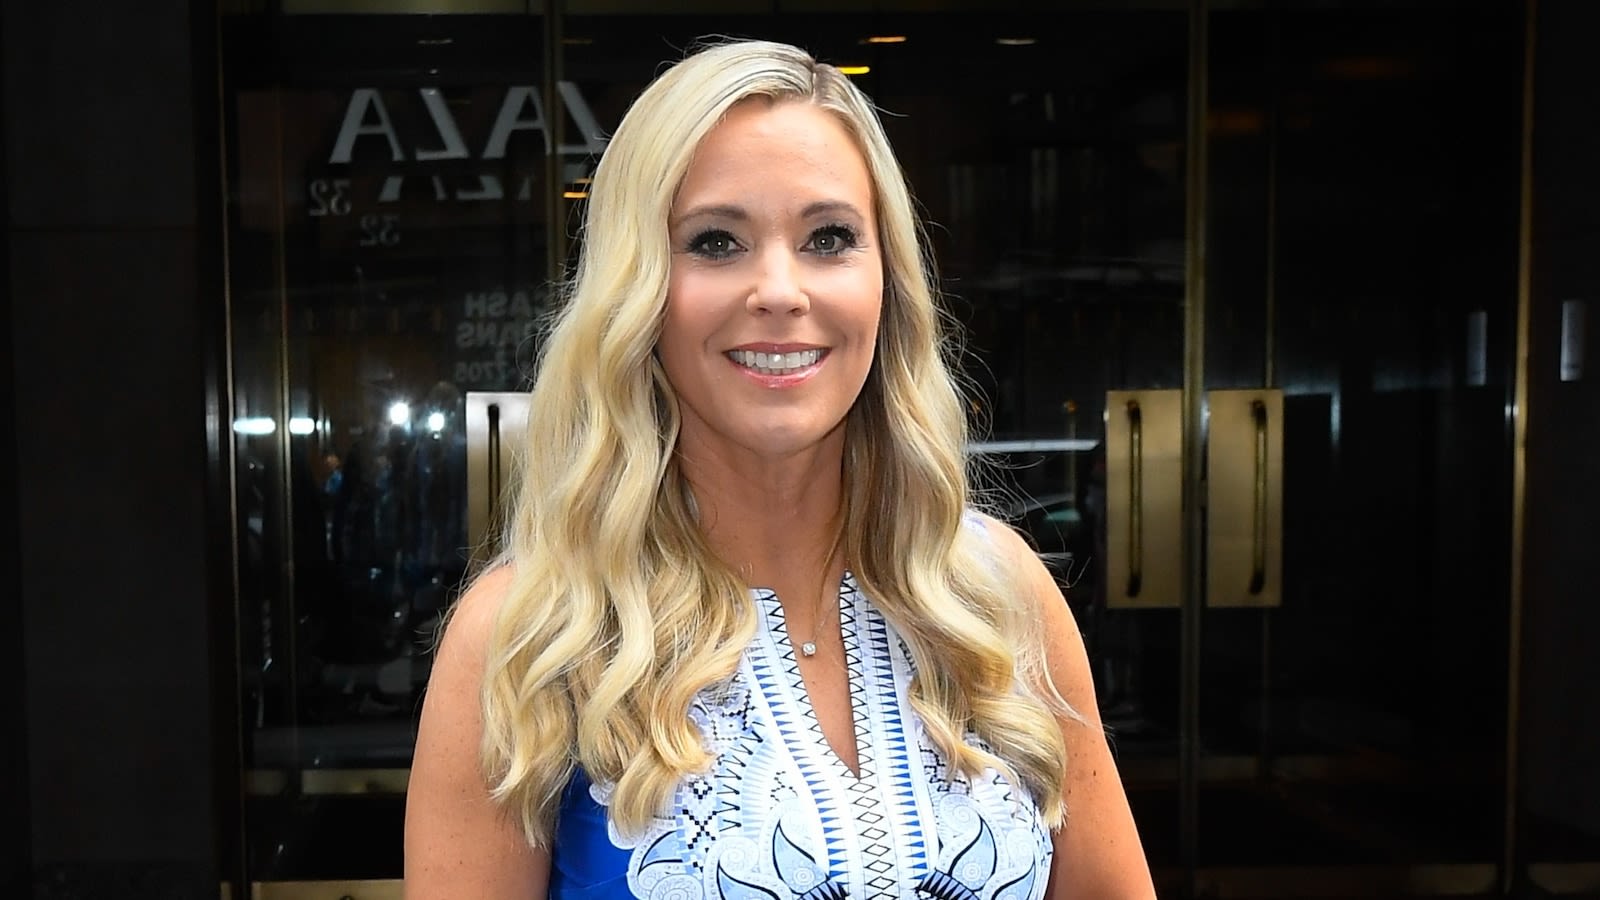 Kate Gosselin marks sextuplets' 20th birthday: 'No more teenagers in this house'